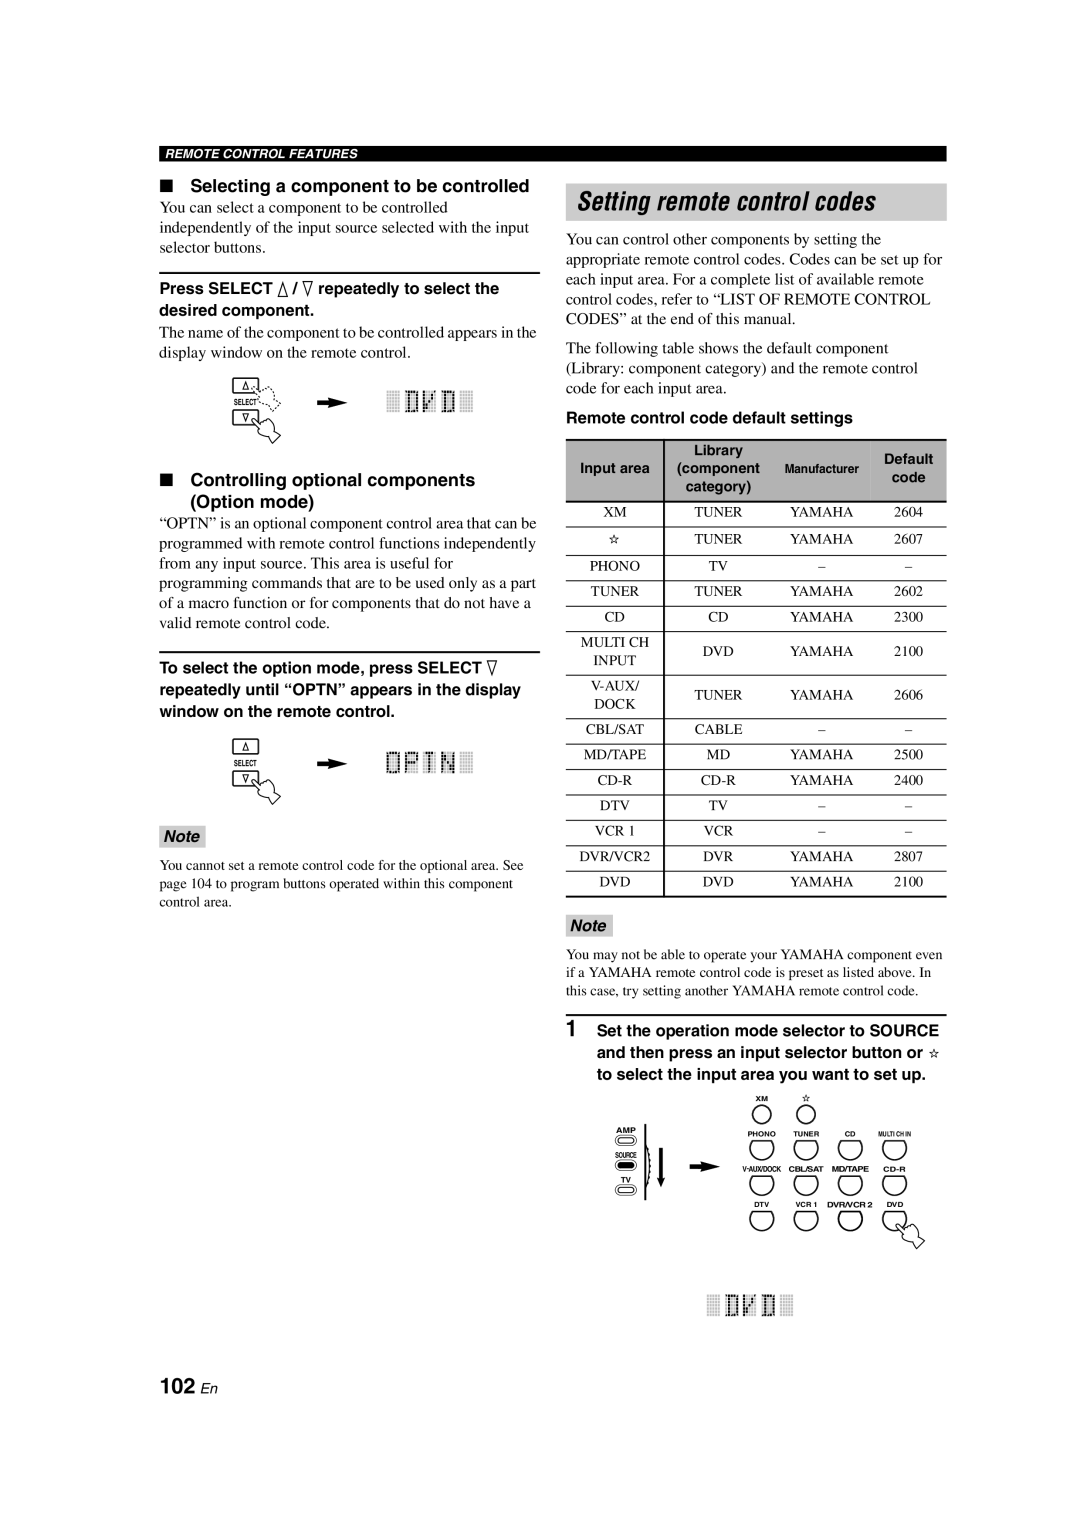 Yamaha HTR-6090 owner manual Setting remote control codes, 102 En, Selecting a component to be controlled 